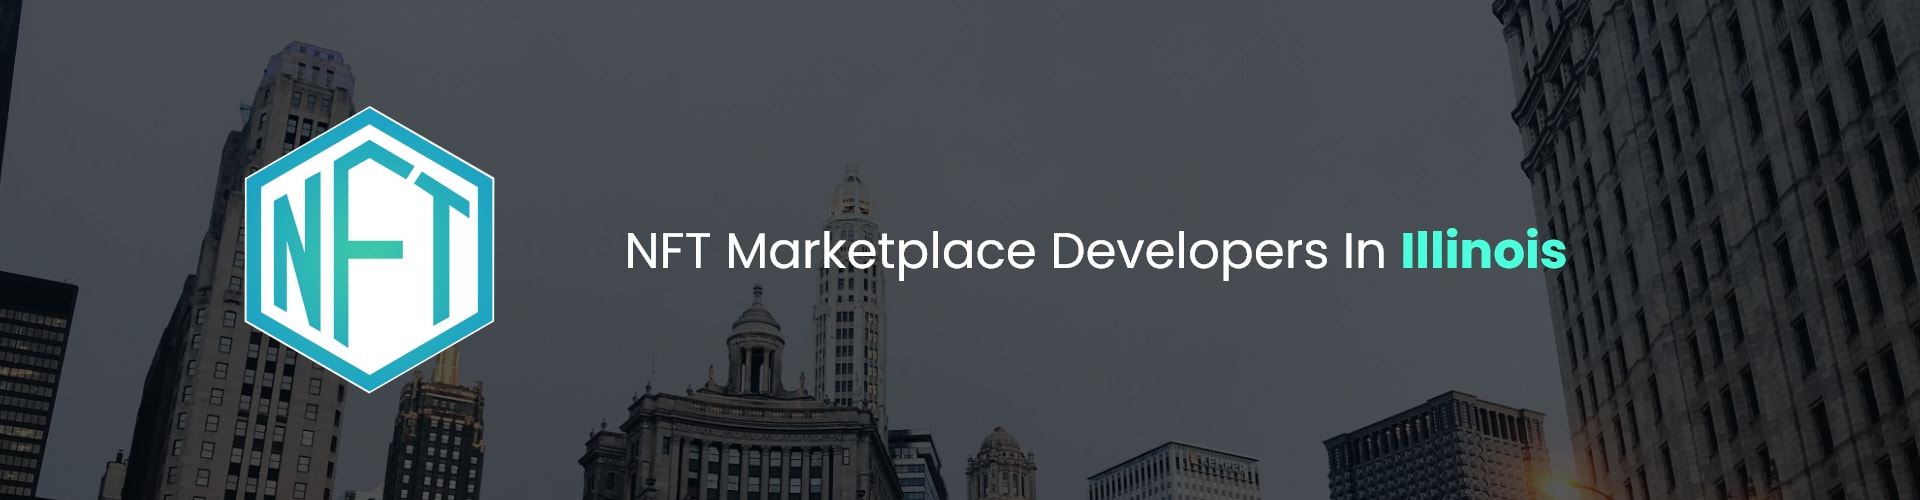 hire nft marketplace developers in illinois